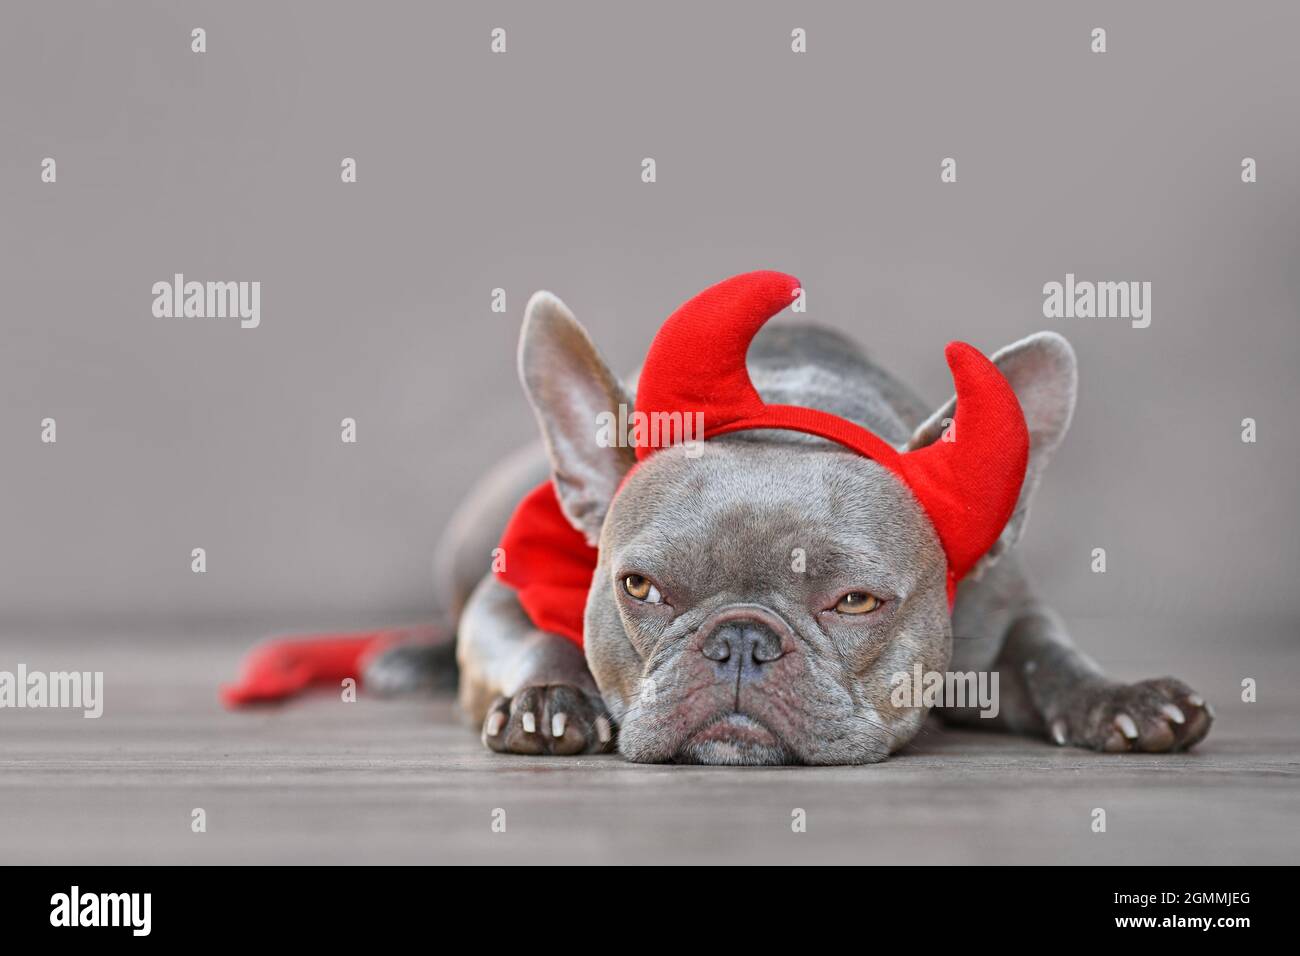 Cute French Bulldog dog wearing red devil horns, tail and bow tie Halloween costume in front of gray background Stock Photo